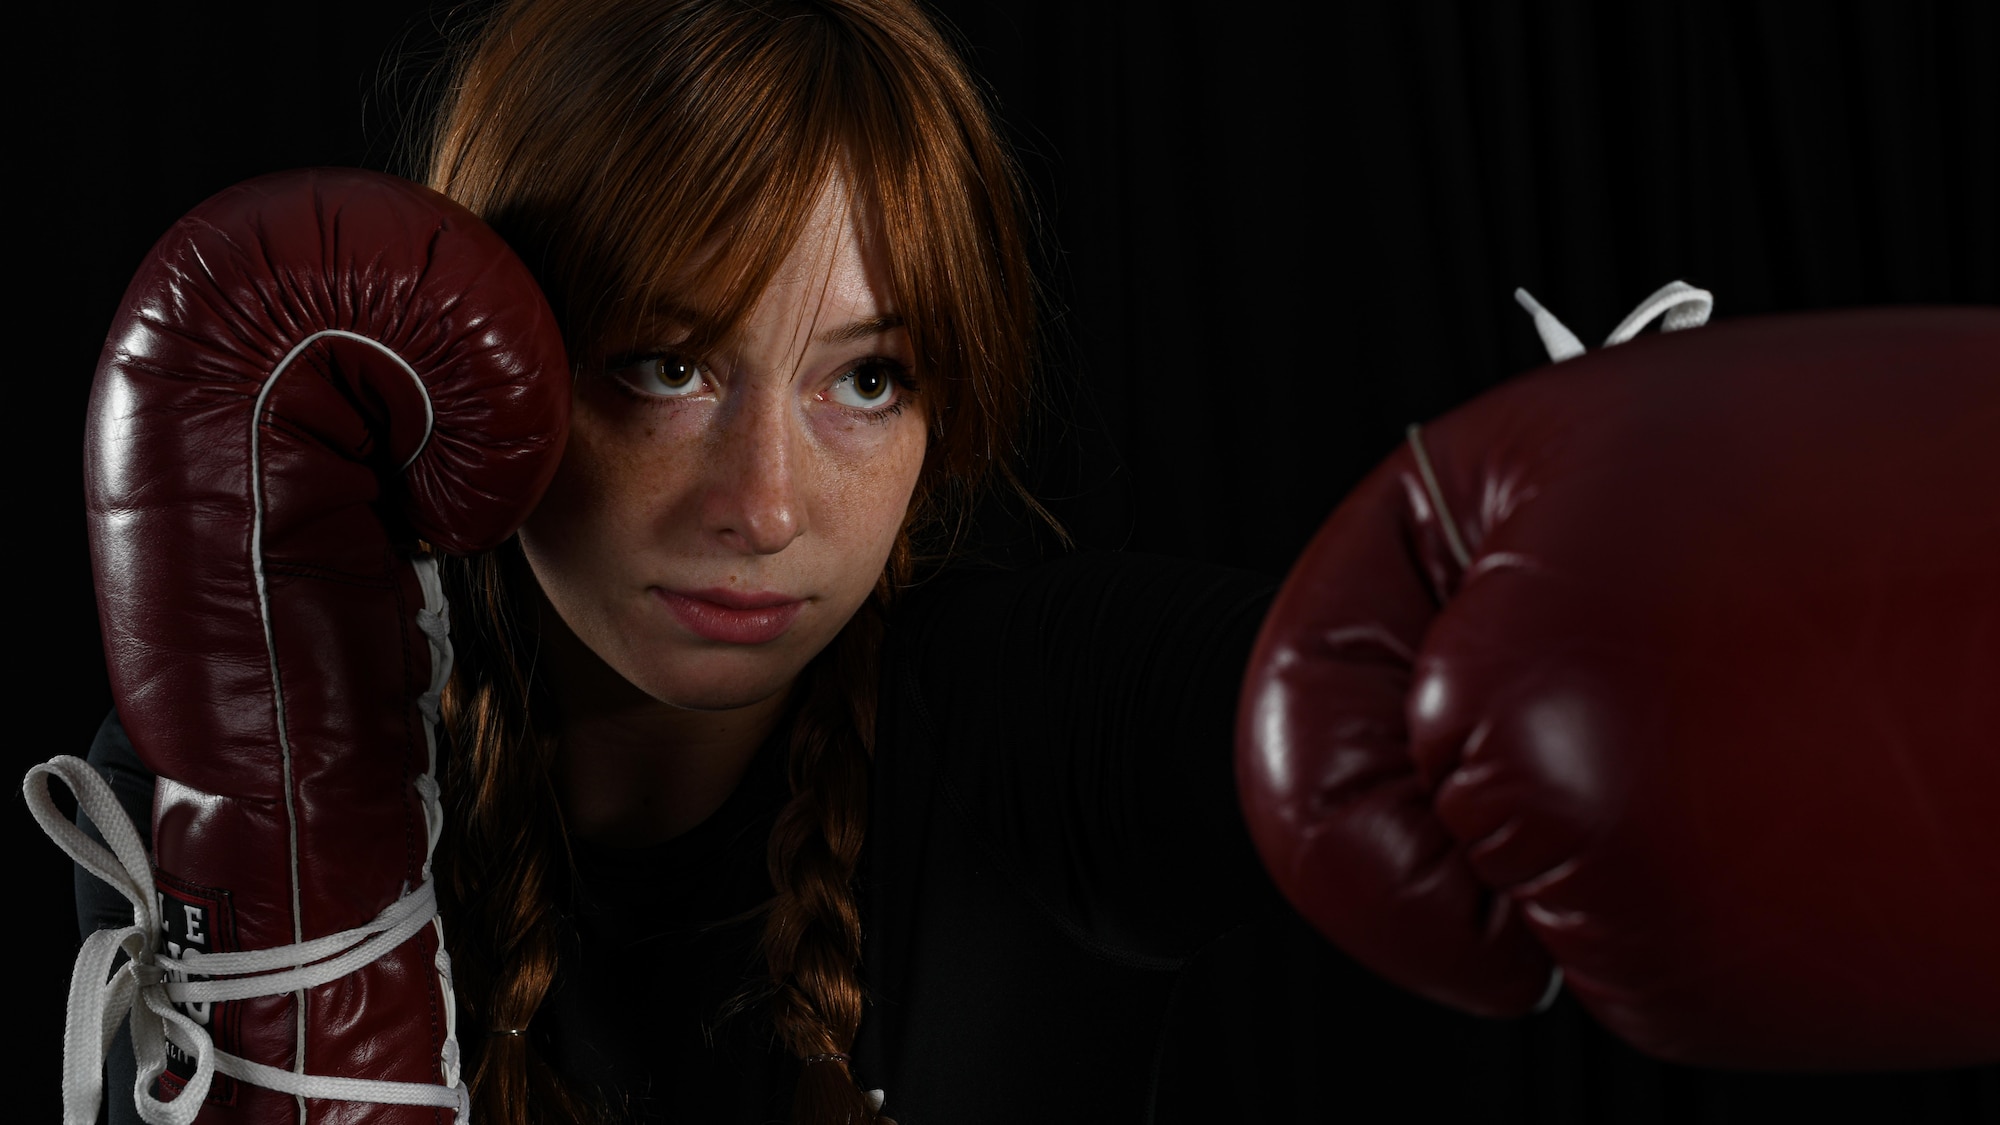 Senior Airman Sarah Jane Gruber, a broadcast journalist for the 910th Public Affairs Office, poses for a photo in her boxing attire, July 11, 2020, Youngstown Air Reserve Station. Gruber competes in Women’s Amateur Boxing for USA Boxing’s Great Lakes Region and has trained in boxing for four years.